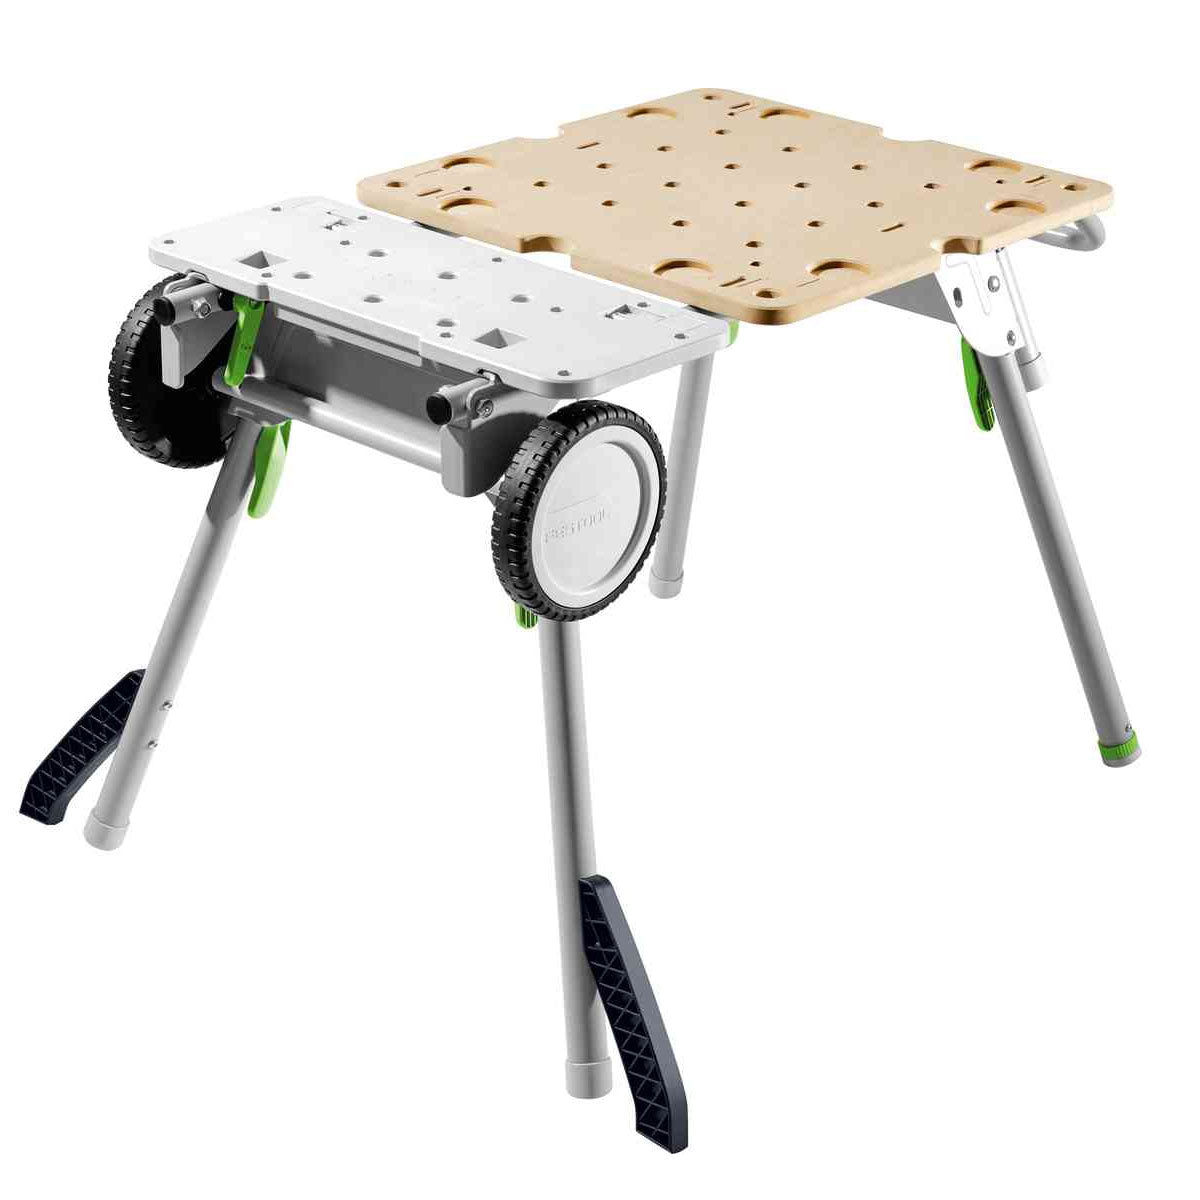 Festool UG-CSC-SYS Underframe Table For CSC SYS 50 Table Saw - 577001